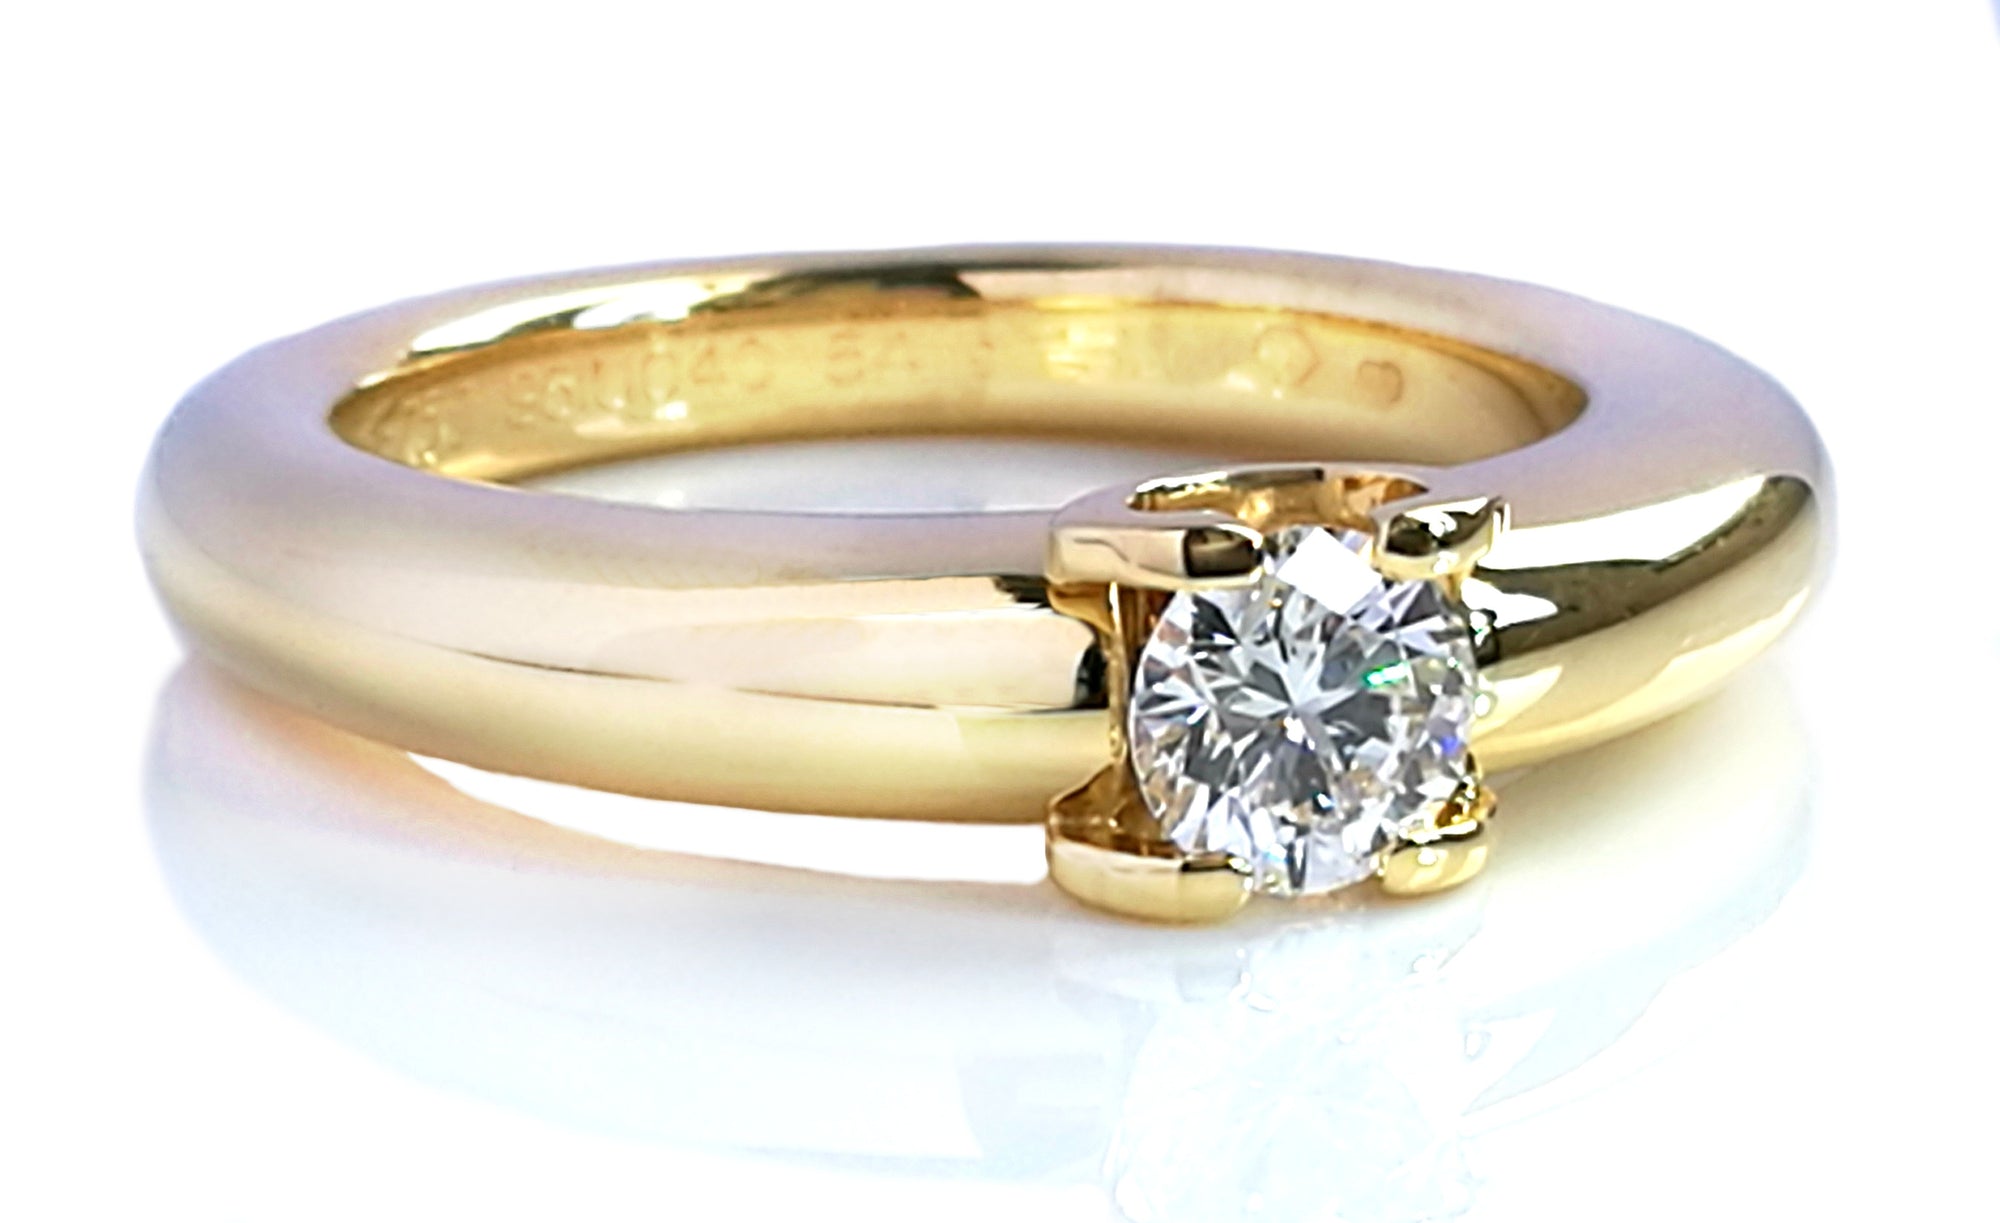 Cartier 0.40ct G/VS Round Brilliant Diamond Engagement Ring in 18k Yellow Gold